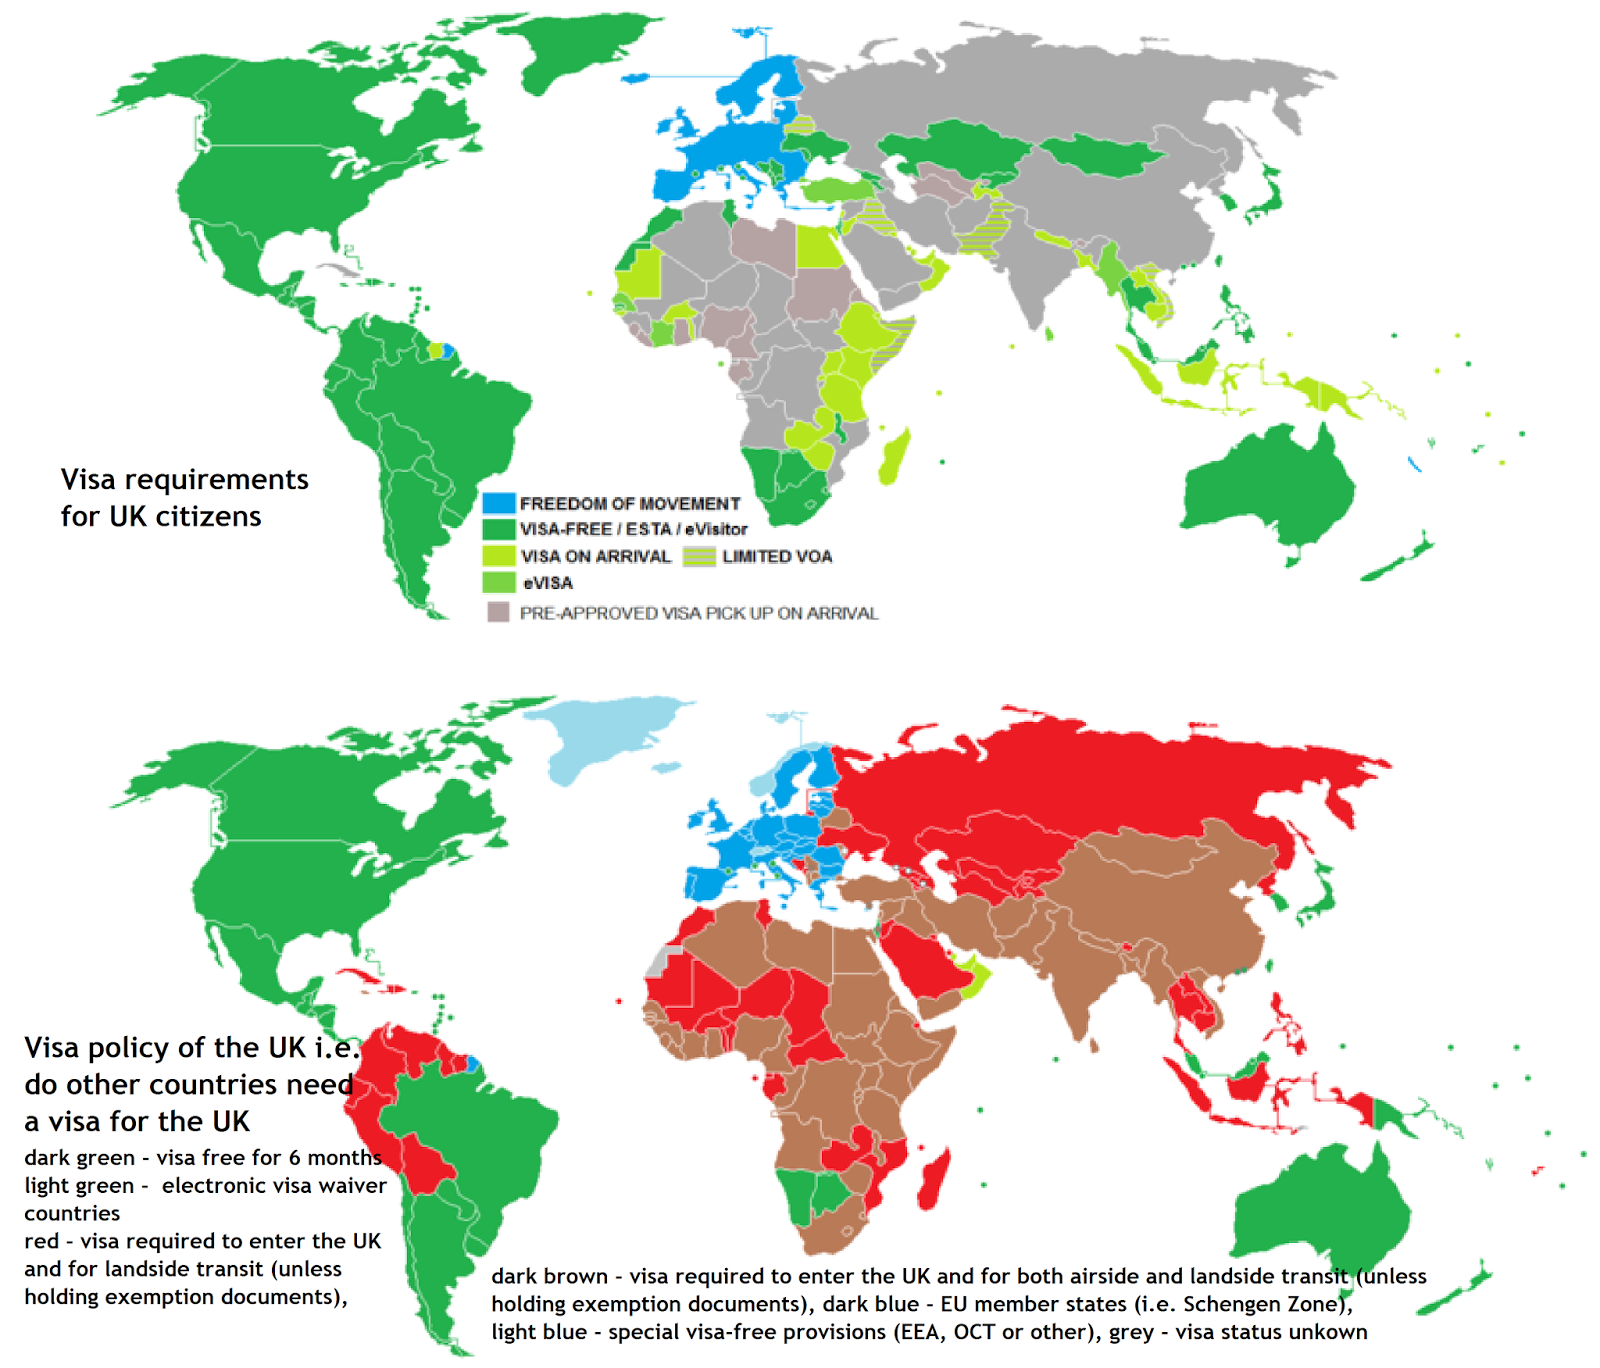 Visa requirements for UK citizens vs visa policy of the UK - Vivid Maps